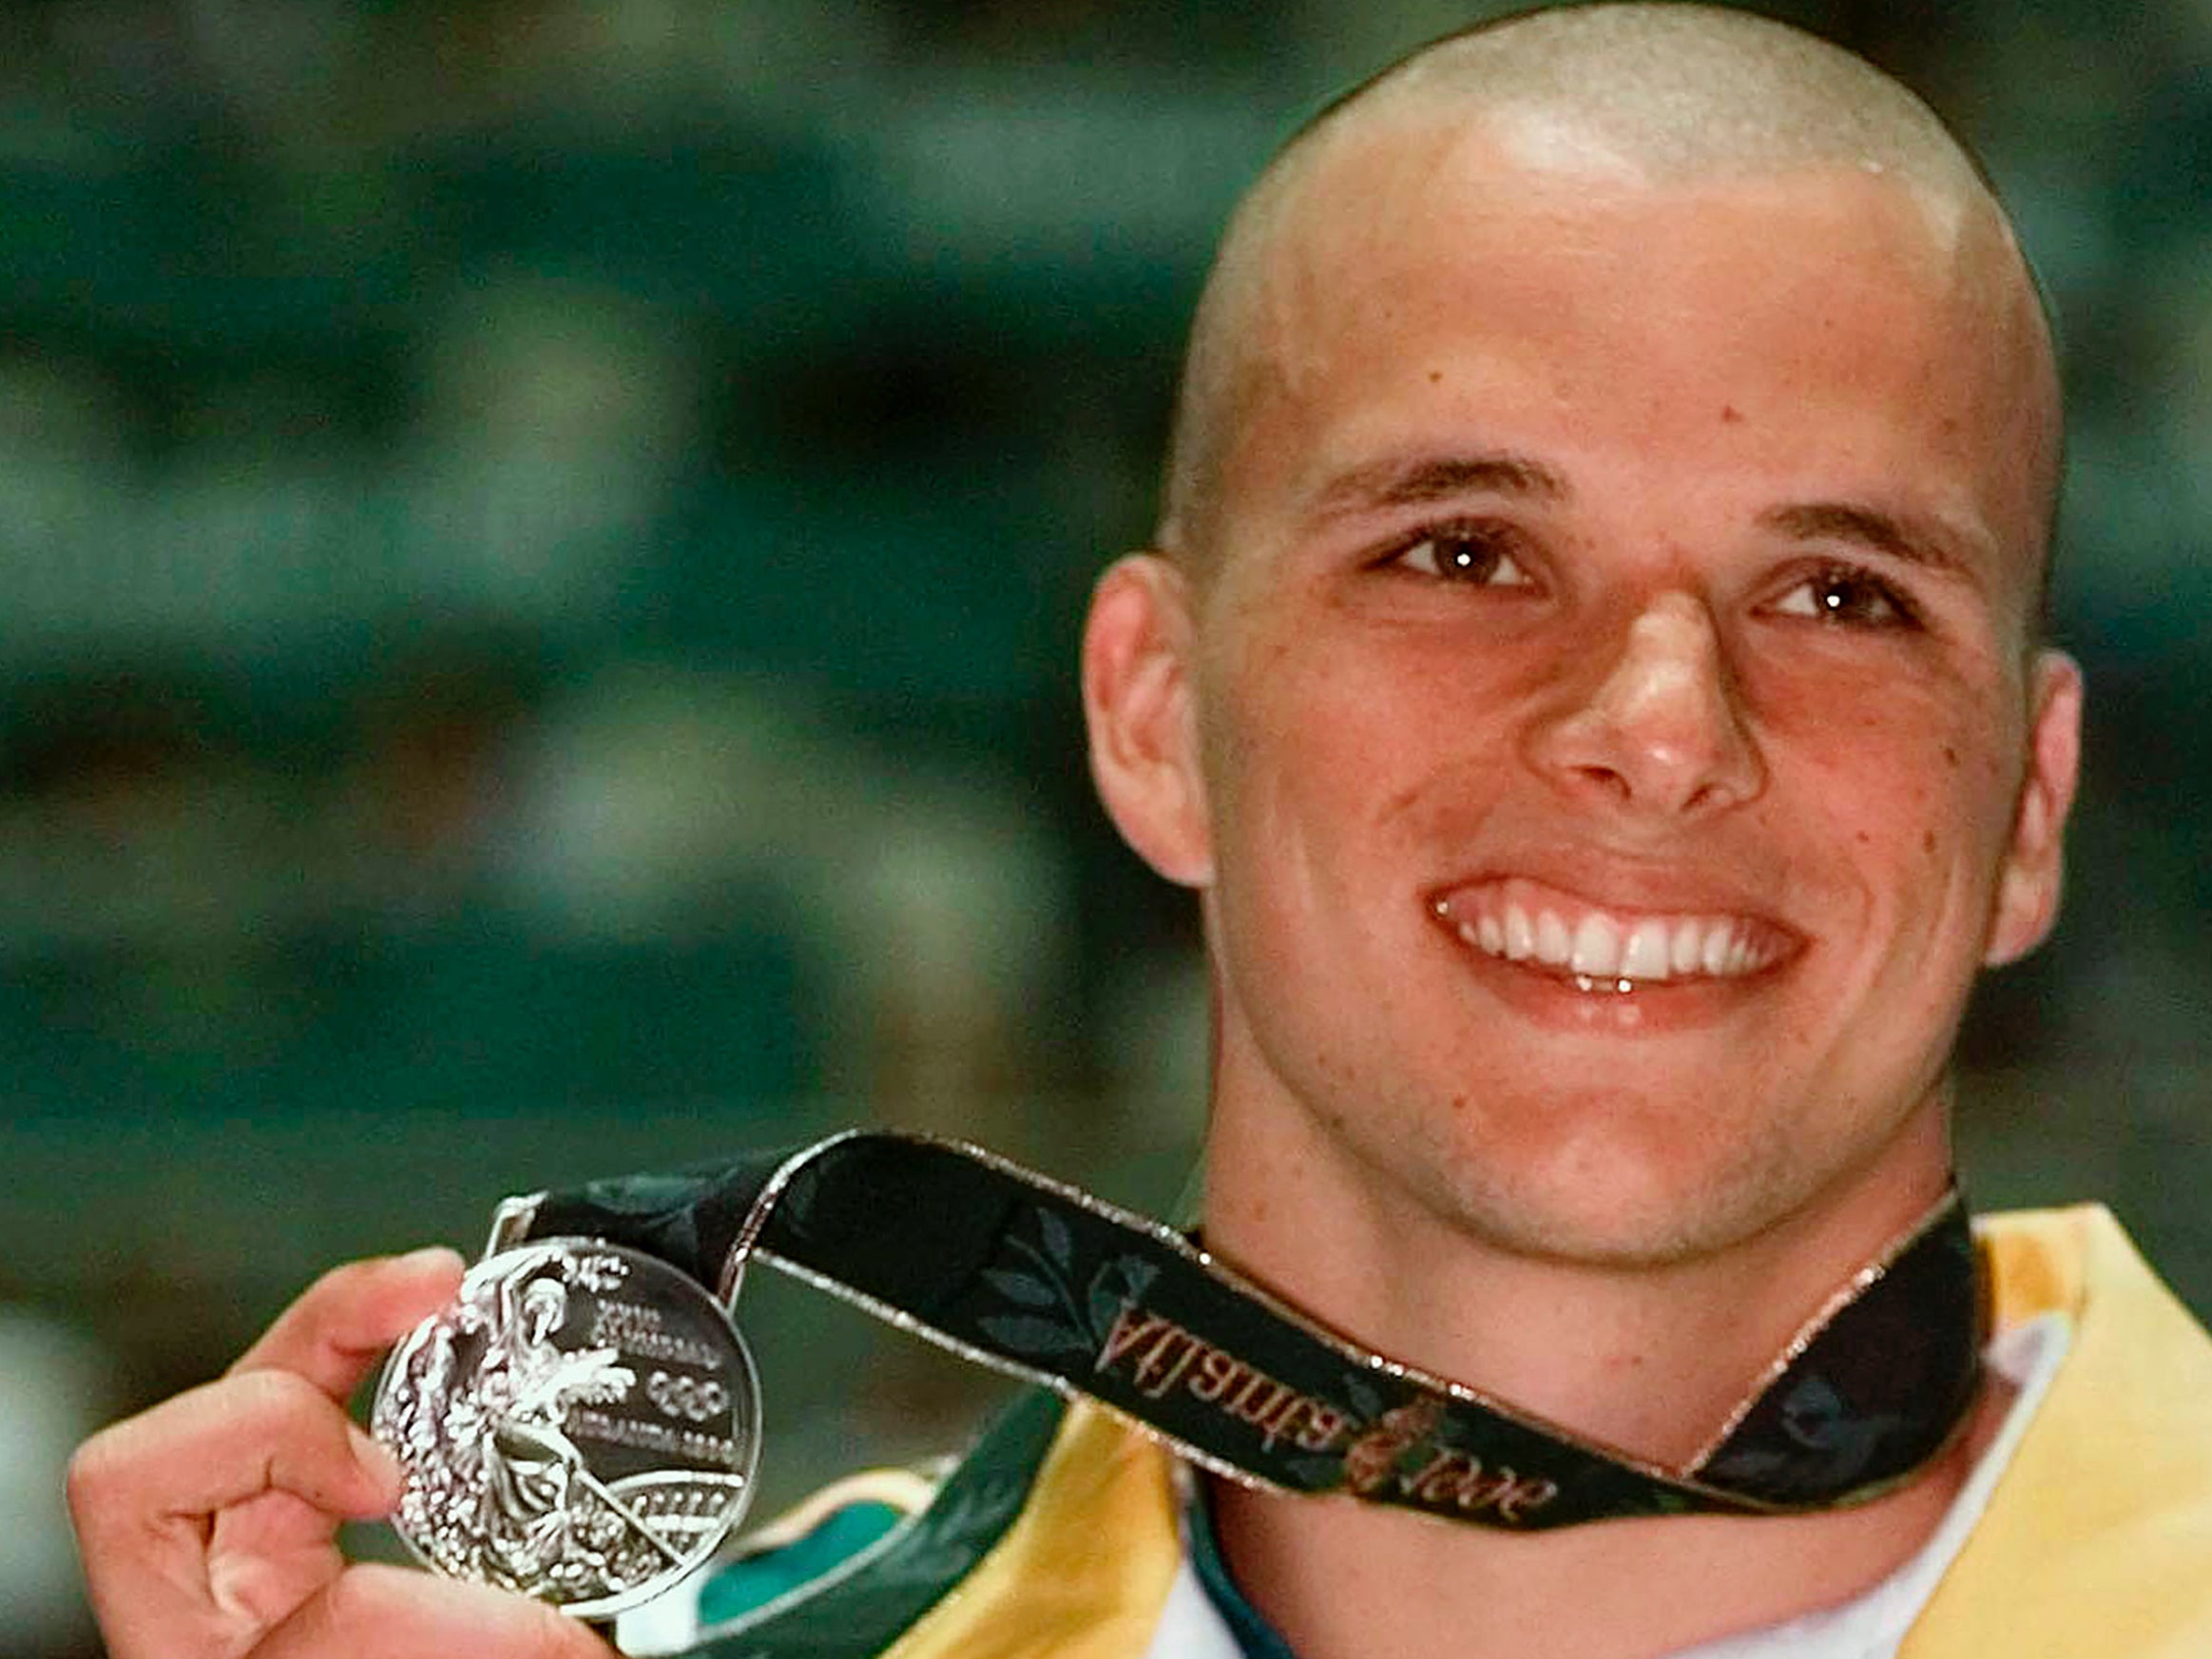 It has been suggested that the former Olympian could have been a the head of a criminal gang